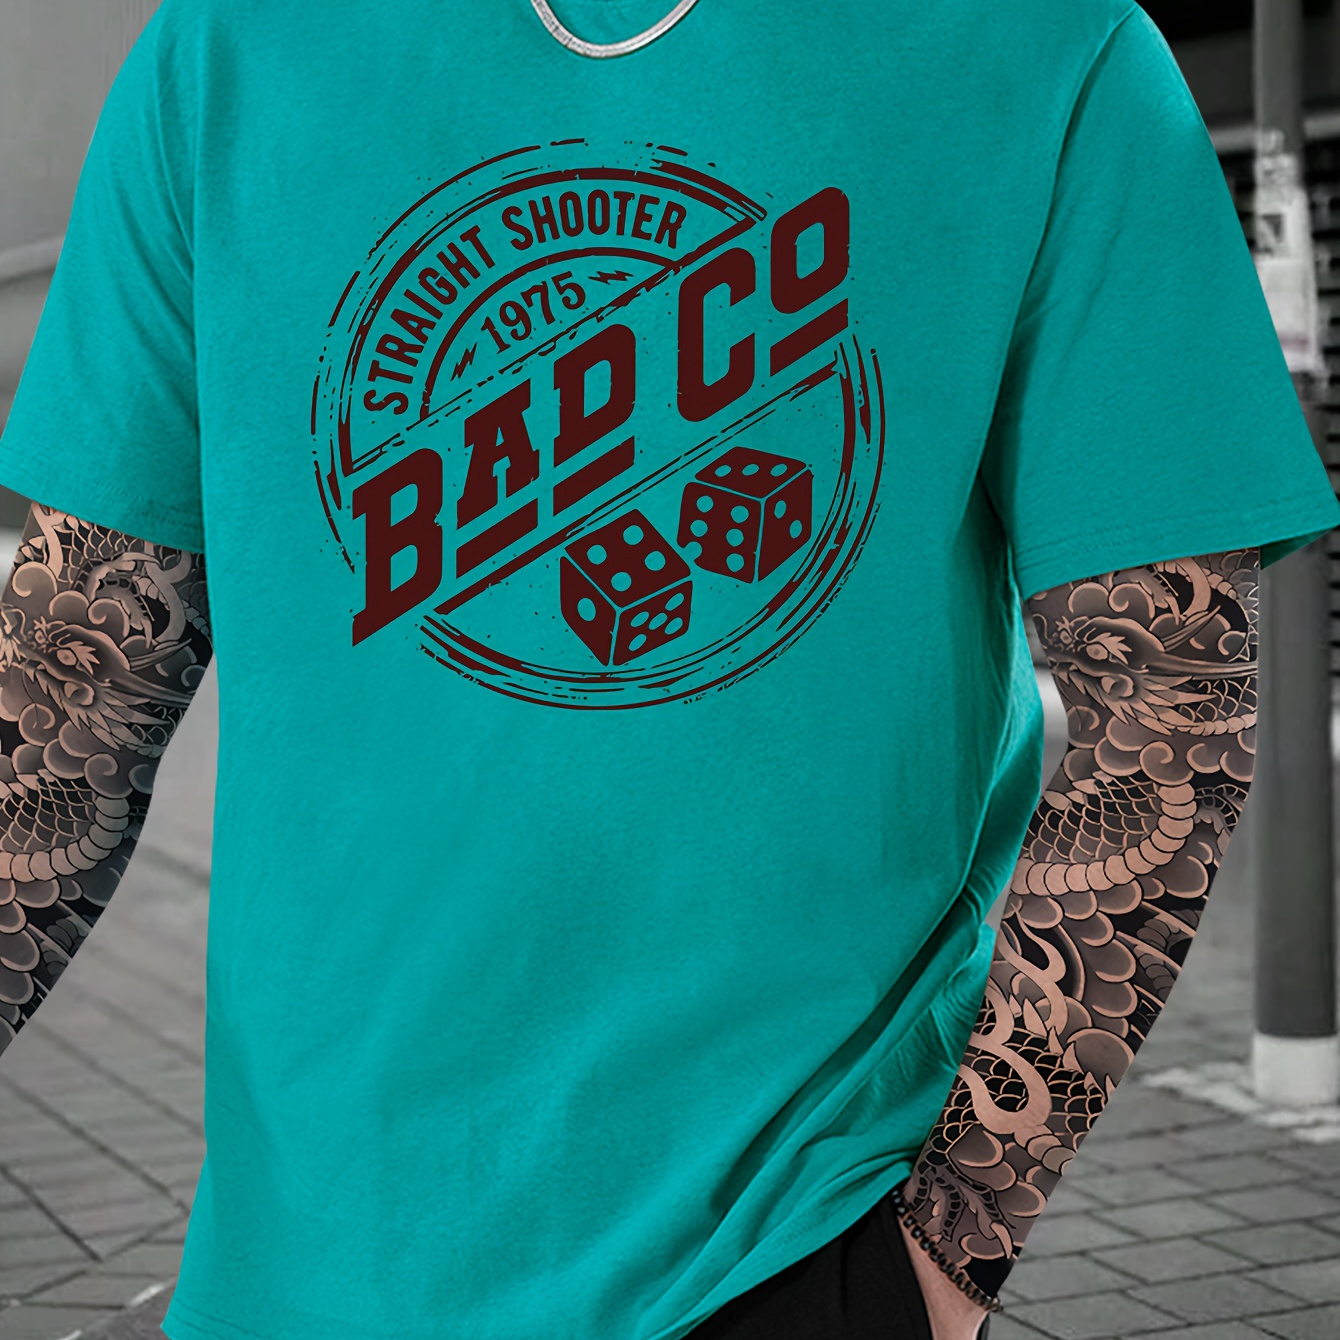 

Bad Co Print Tee Shirt, Tees For Men, Casual Short Sleeve T-shirt For Summer